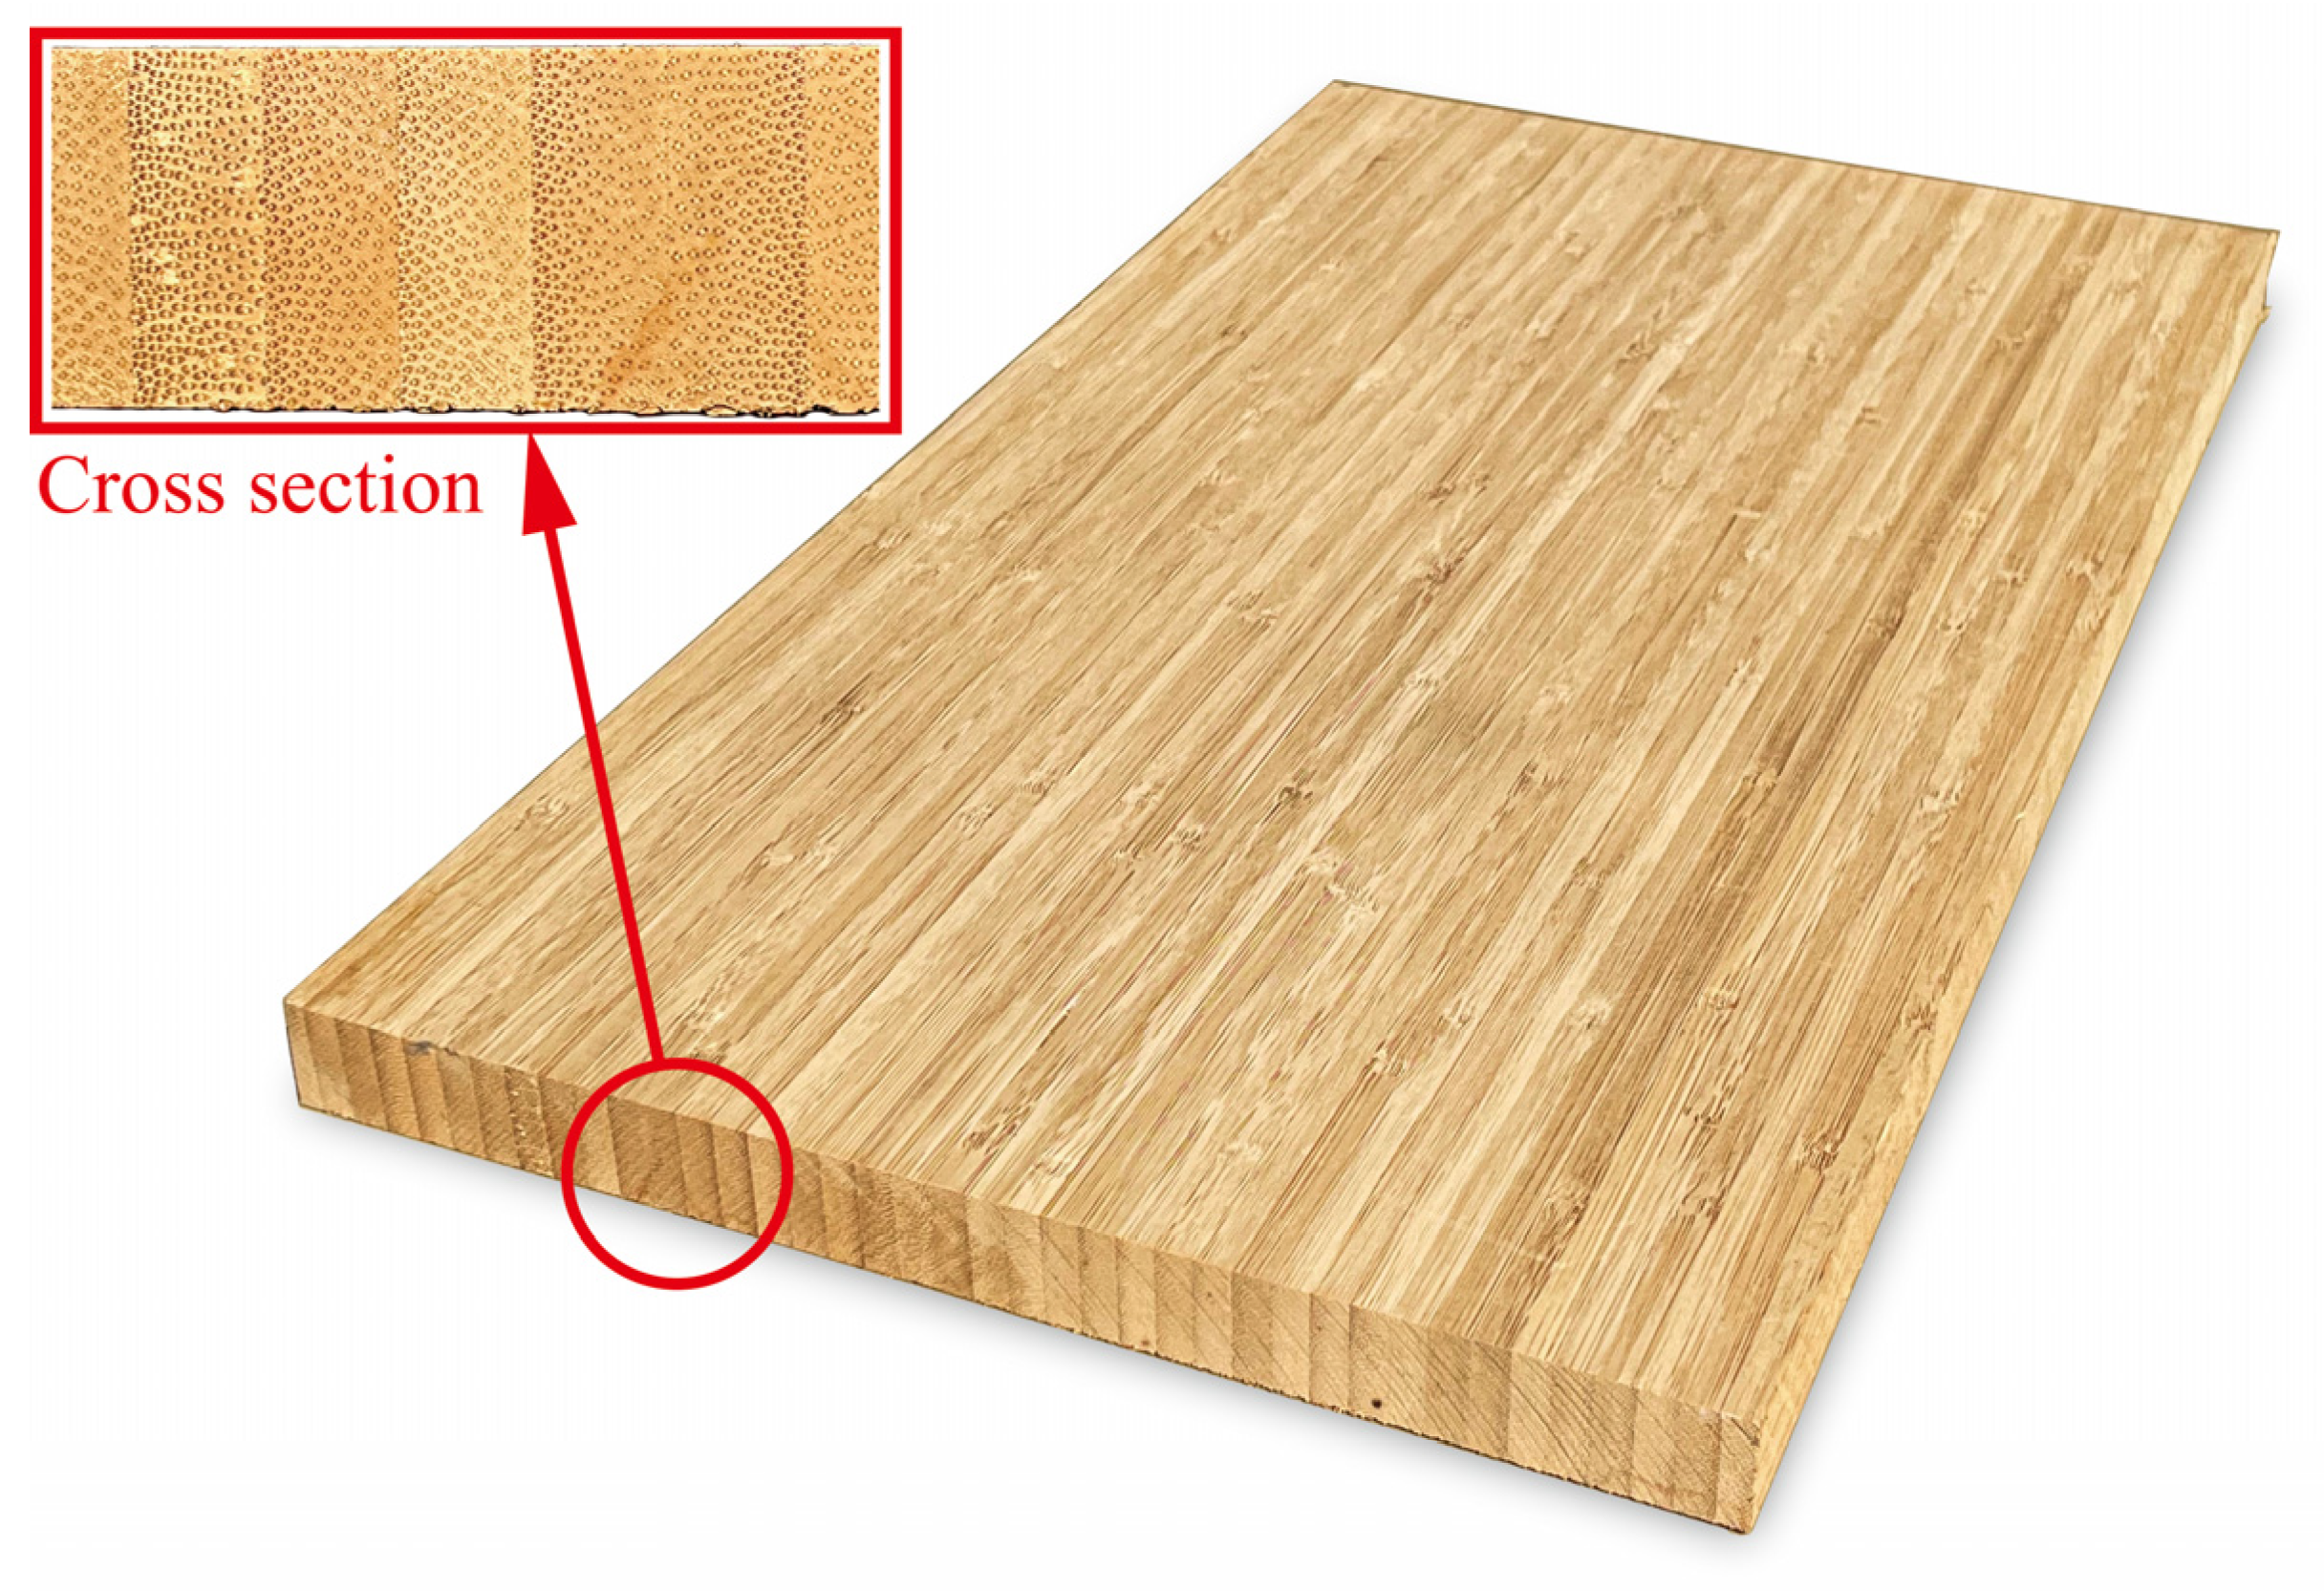 Classification of laminated bamboo lumber. (a) Flat-pressure